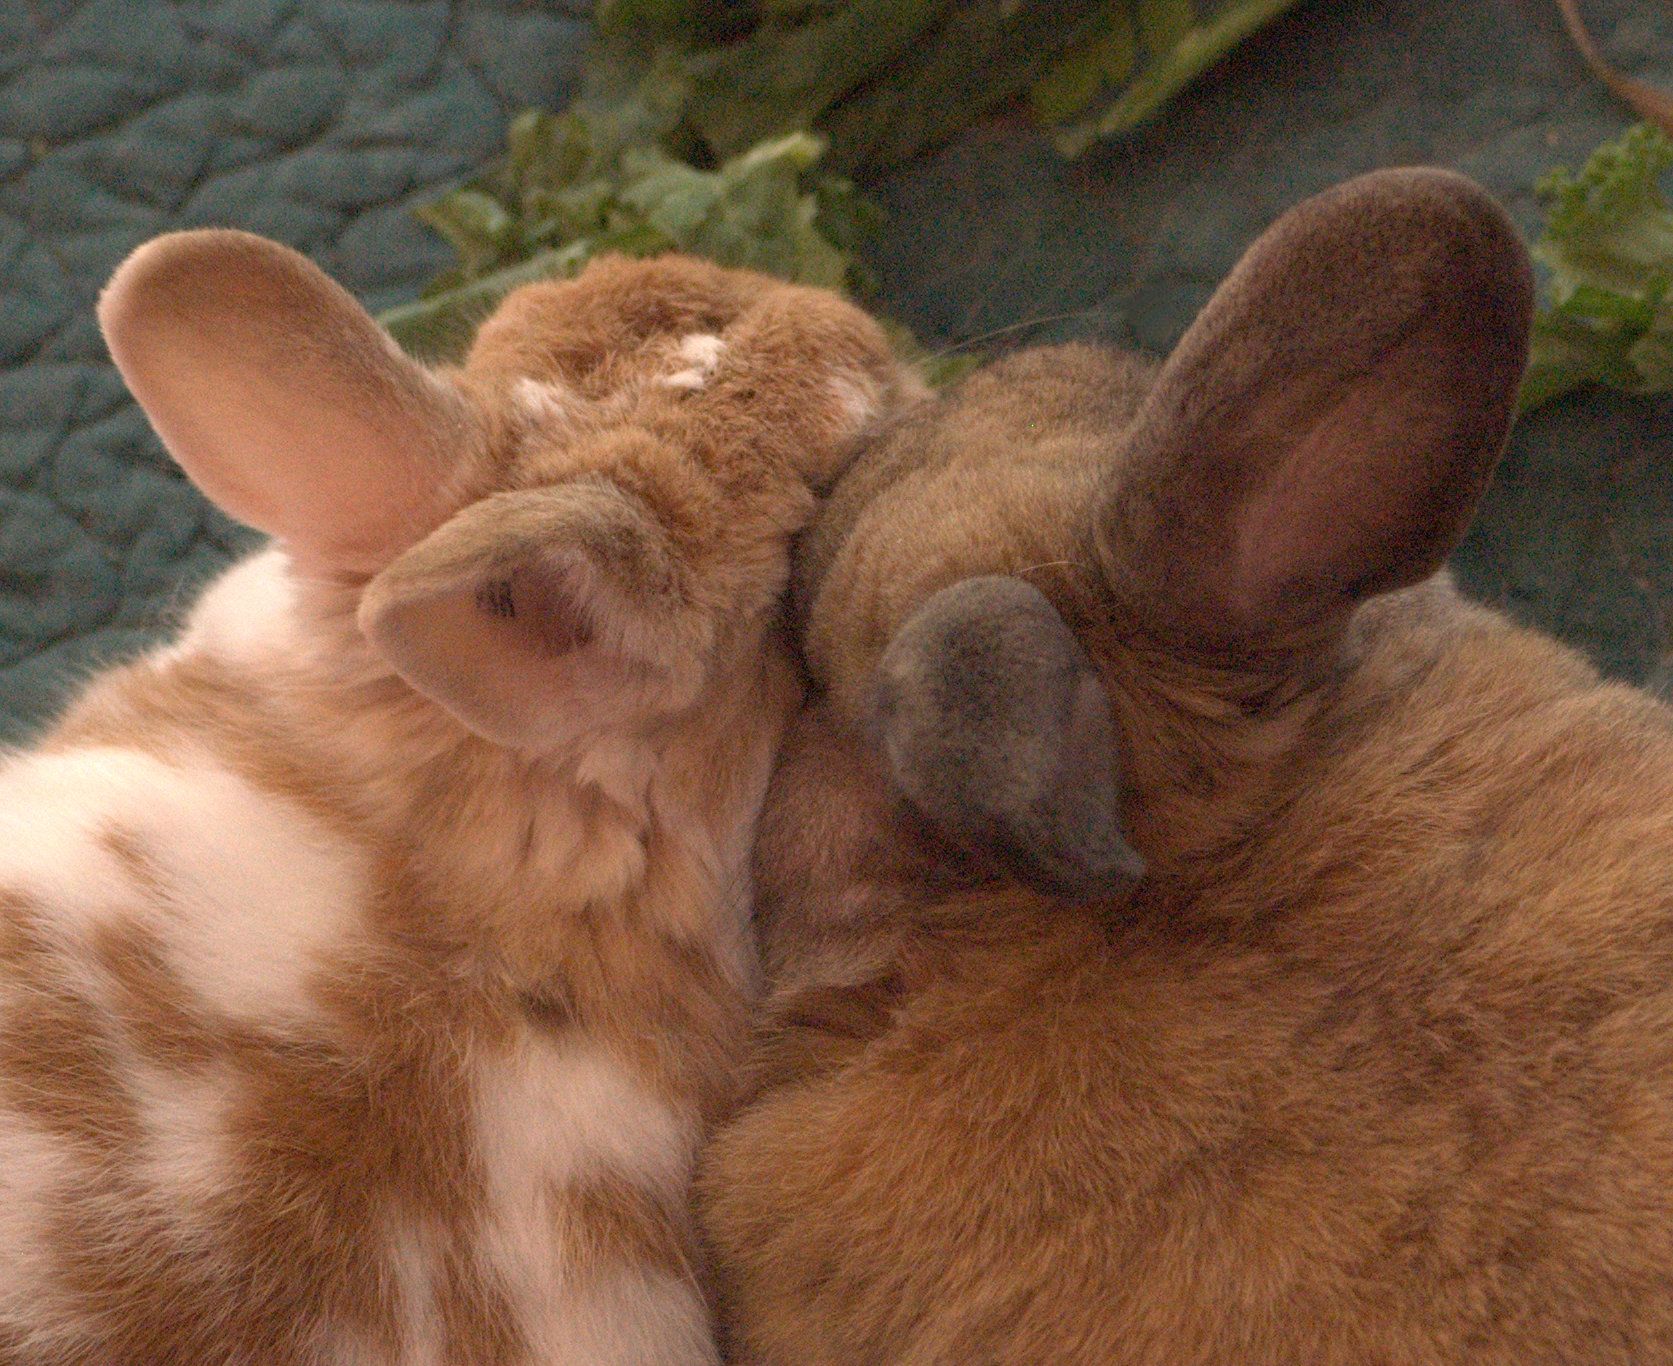 the rabbit is rubbing his head against another bunny